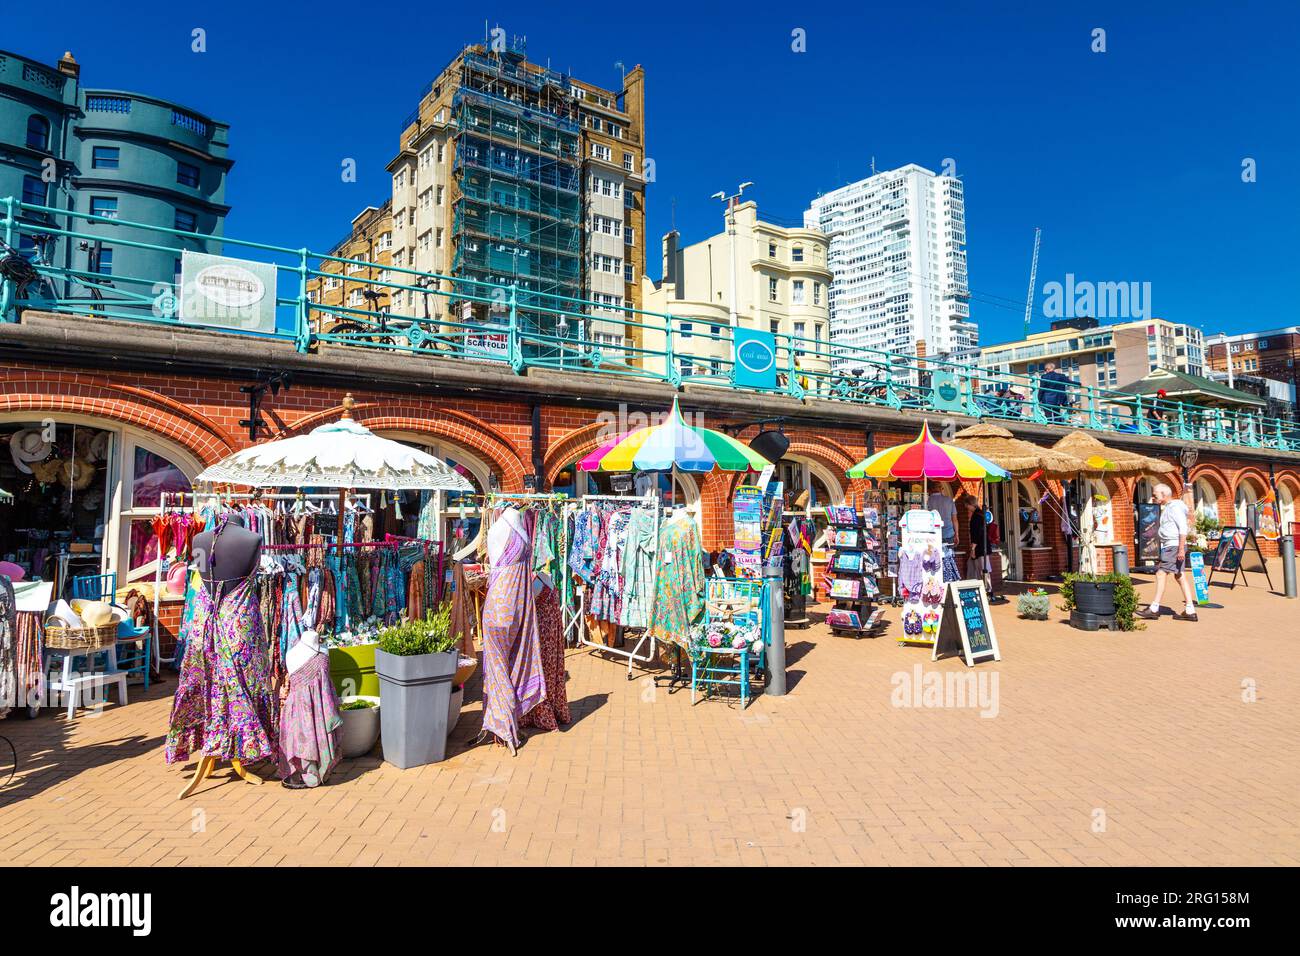 Beach clothing shops in the Kings Road Arches, Brighton, England Stock Photo